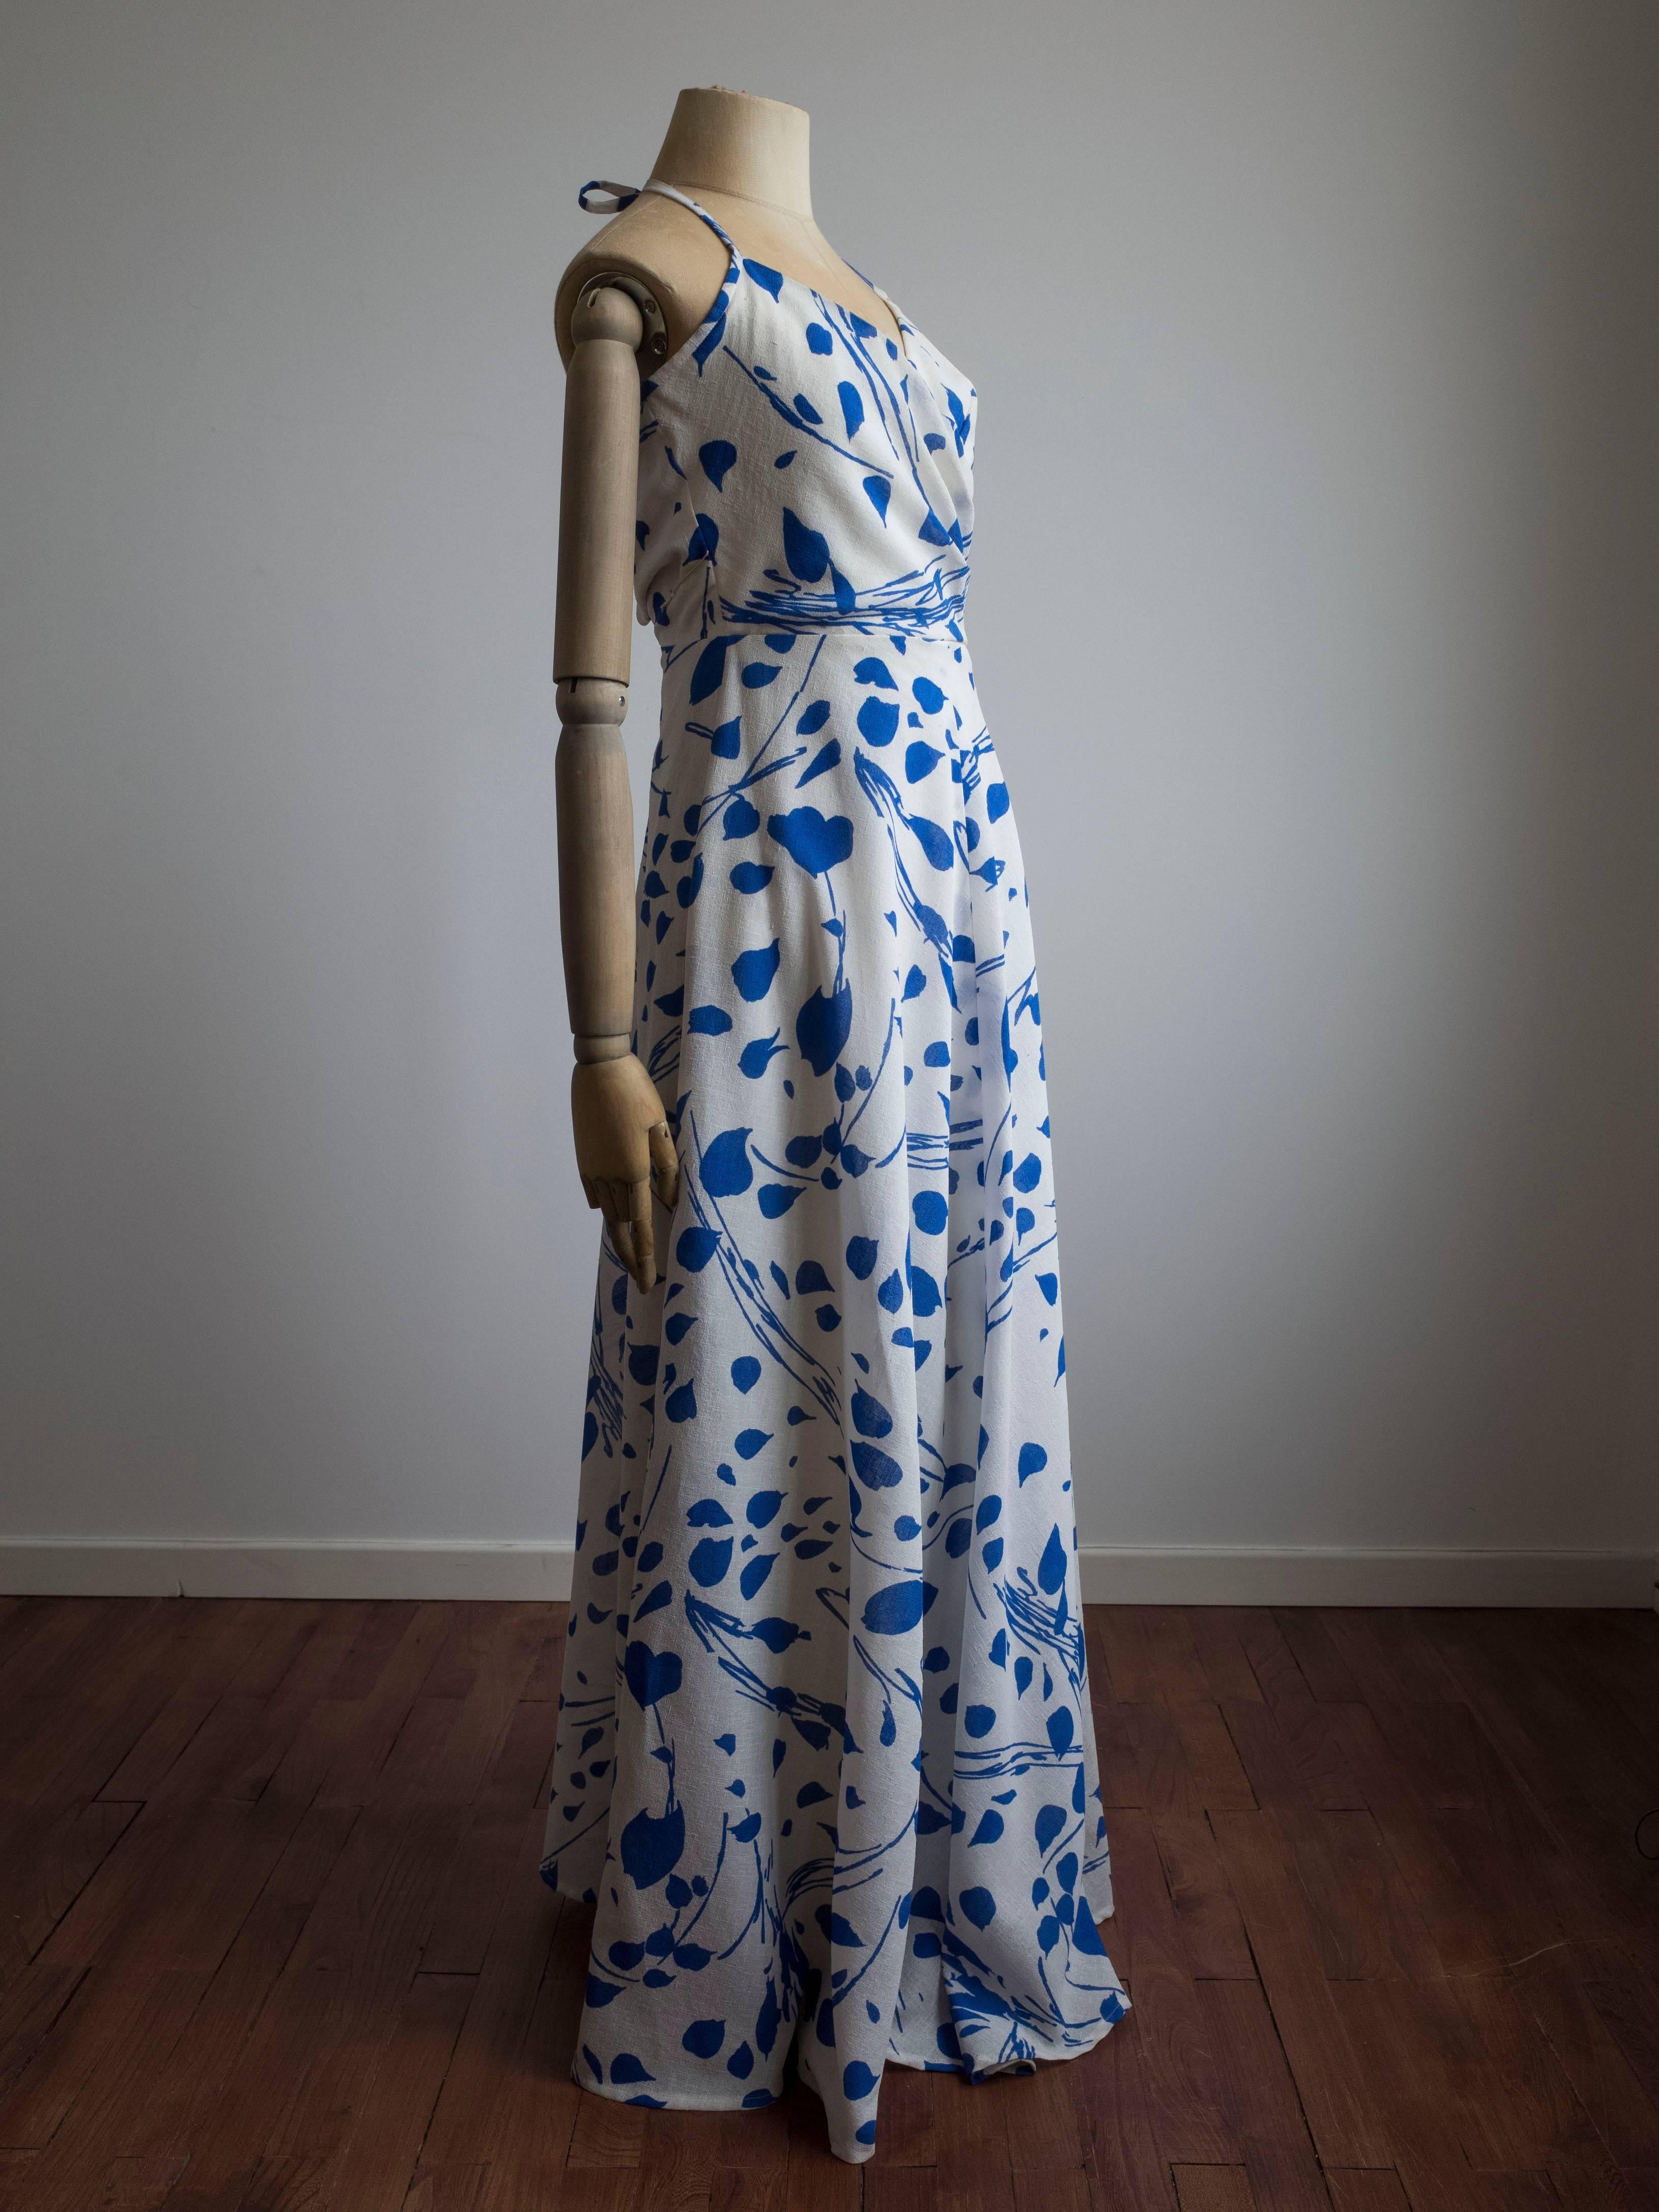 1960s blue and white floral print dress by Jean Allen. Made in London, England. Never been worn - still has original tags.
Halter style neckline with cross-over bust and pleating at the waist. The full circle skirt is bias cut with beautiful